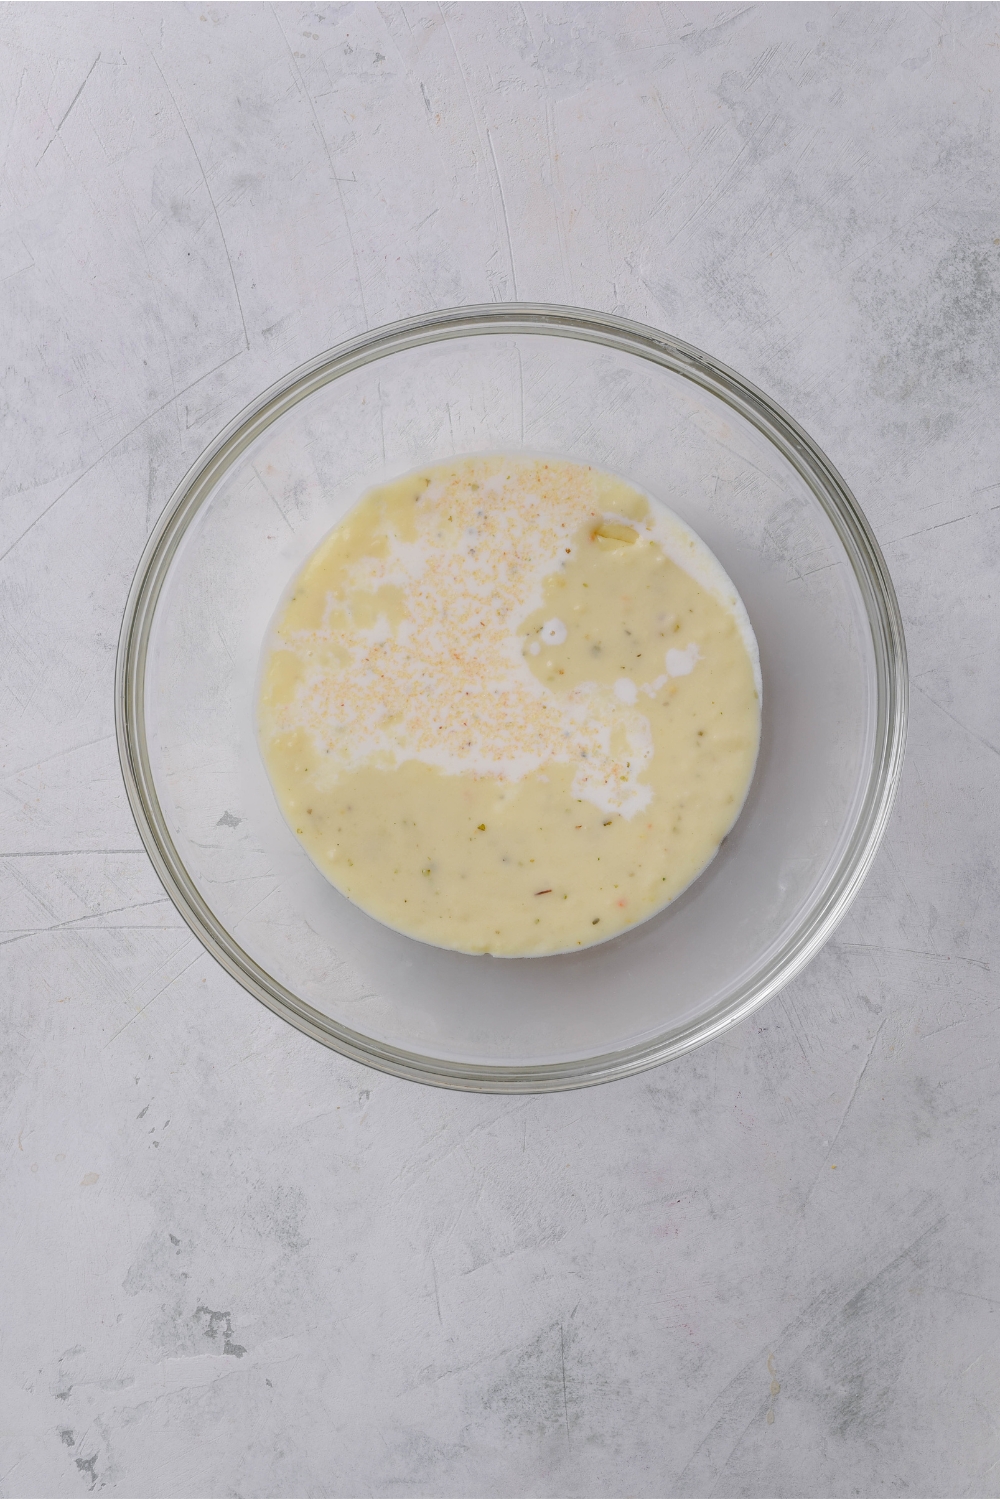 A clear bowl with a creamy soup mixture in it.